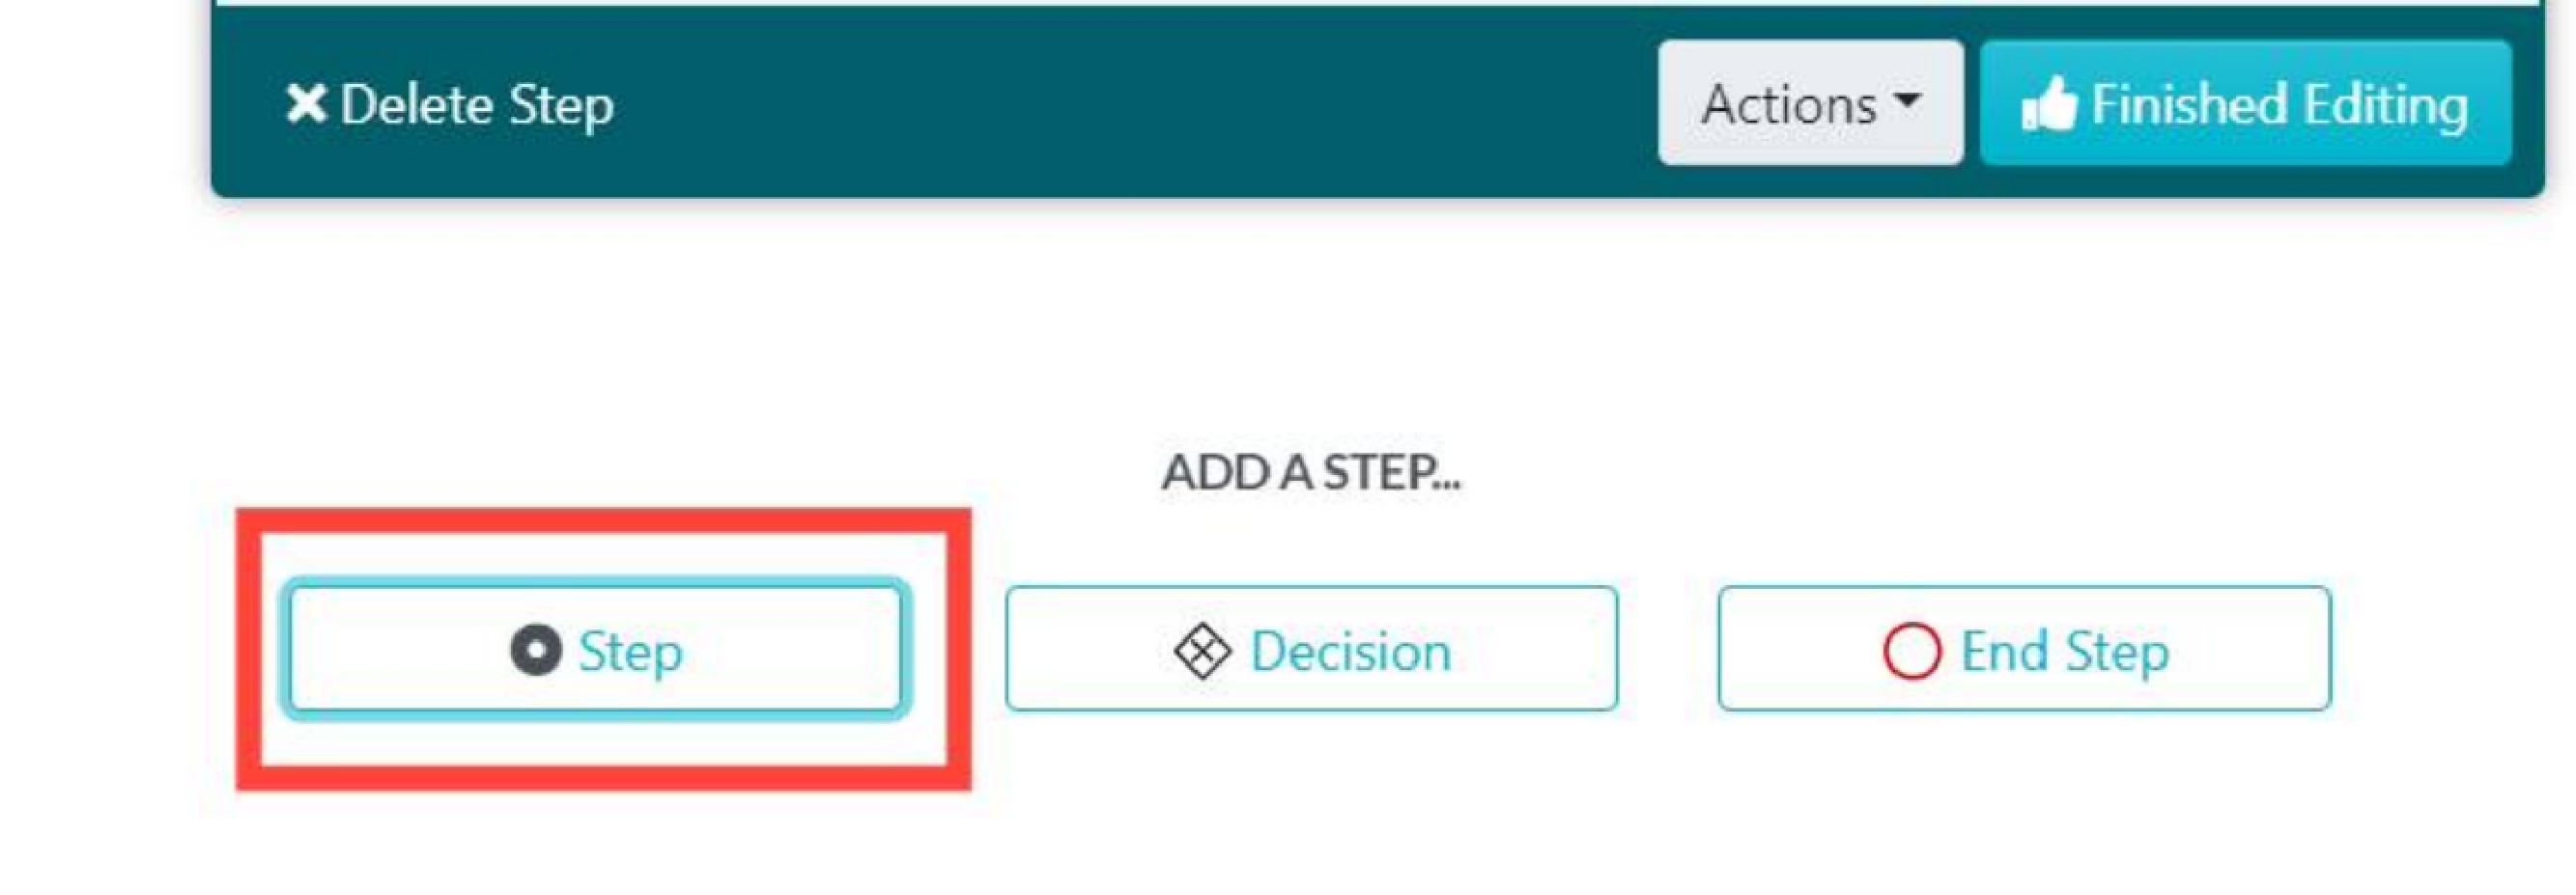 Press the “Add a Step” button again to continue adding steps.